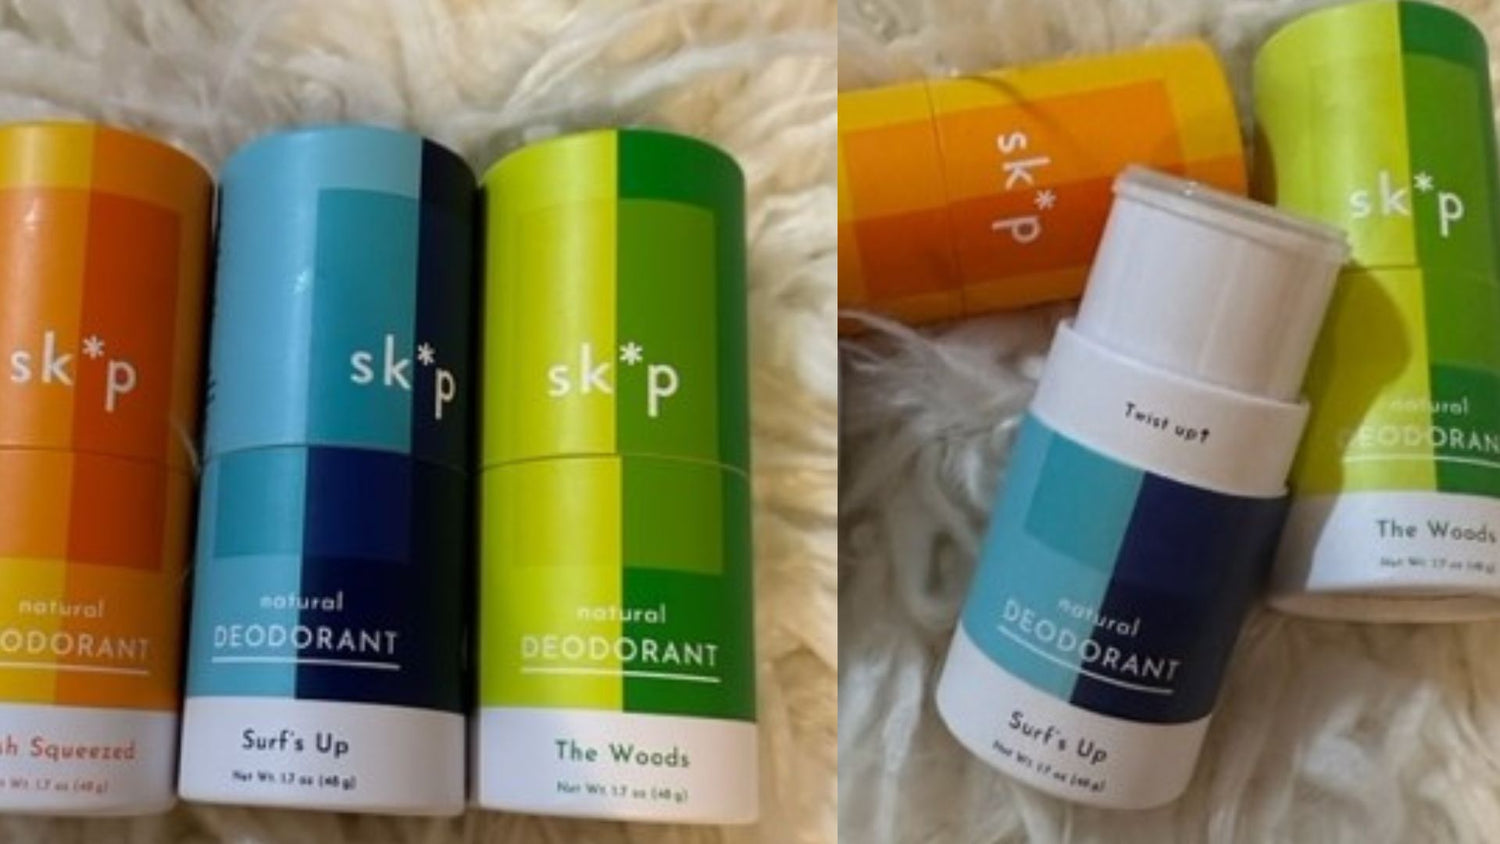 review, photos, ingredients, trends, skin care, 2023, 2023, sk*p, natural deodorant, aluminum free deodorant, peta certified, cruelty free, certified clean, ethically sourced